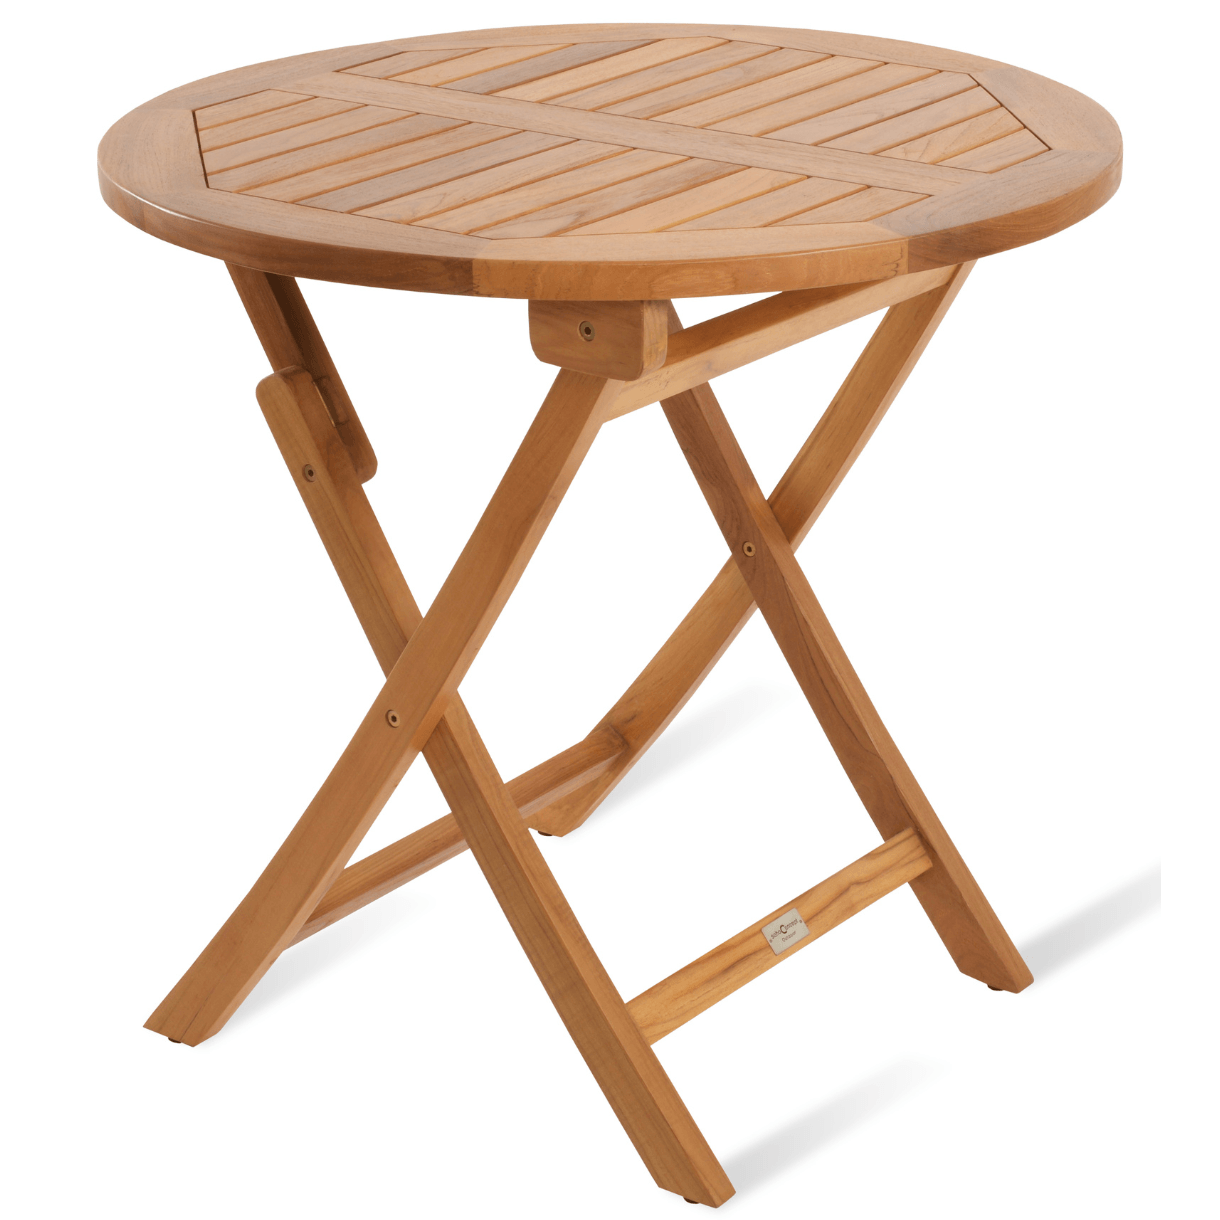 Round Patio Table For 2-4 People Pamela Folding - Your Bar Stools Canada